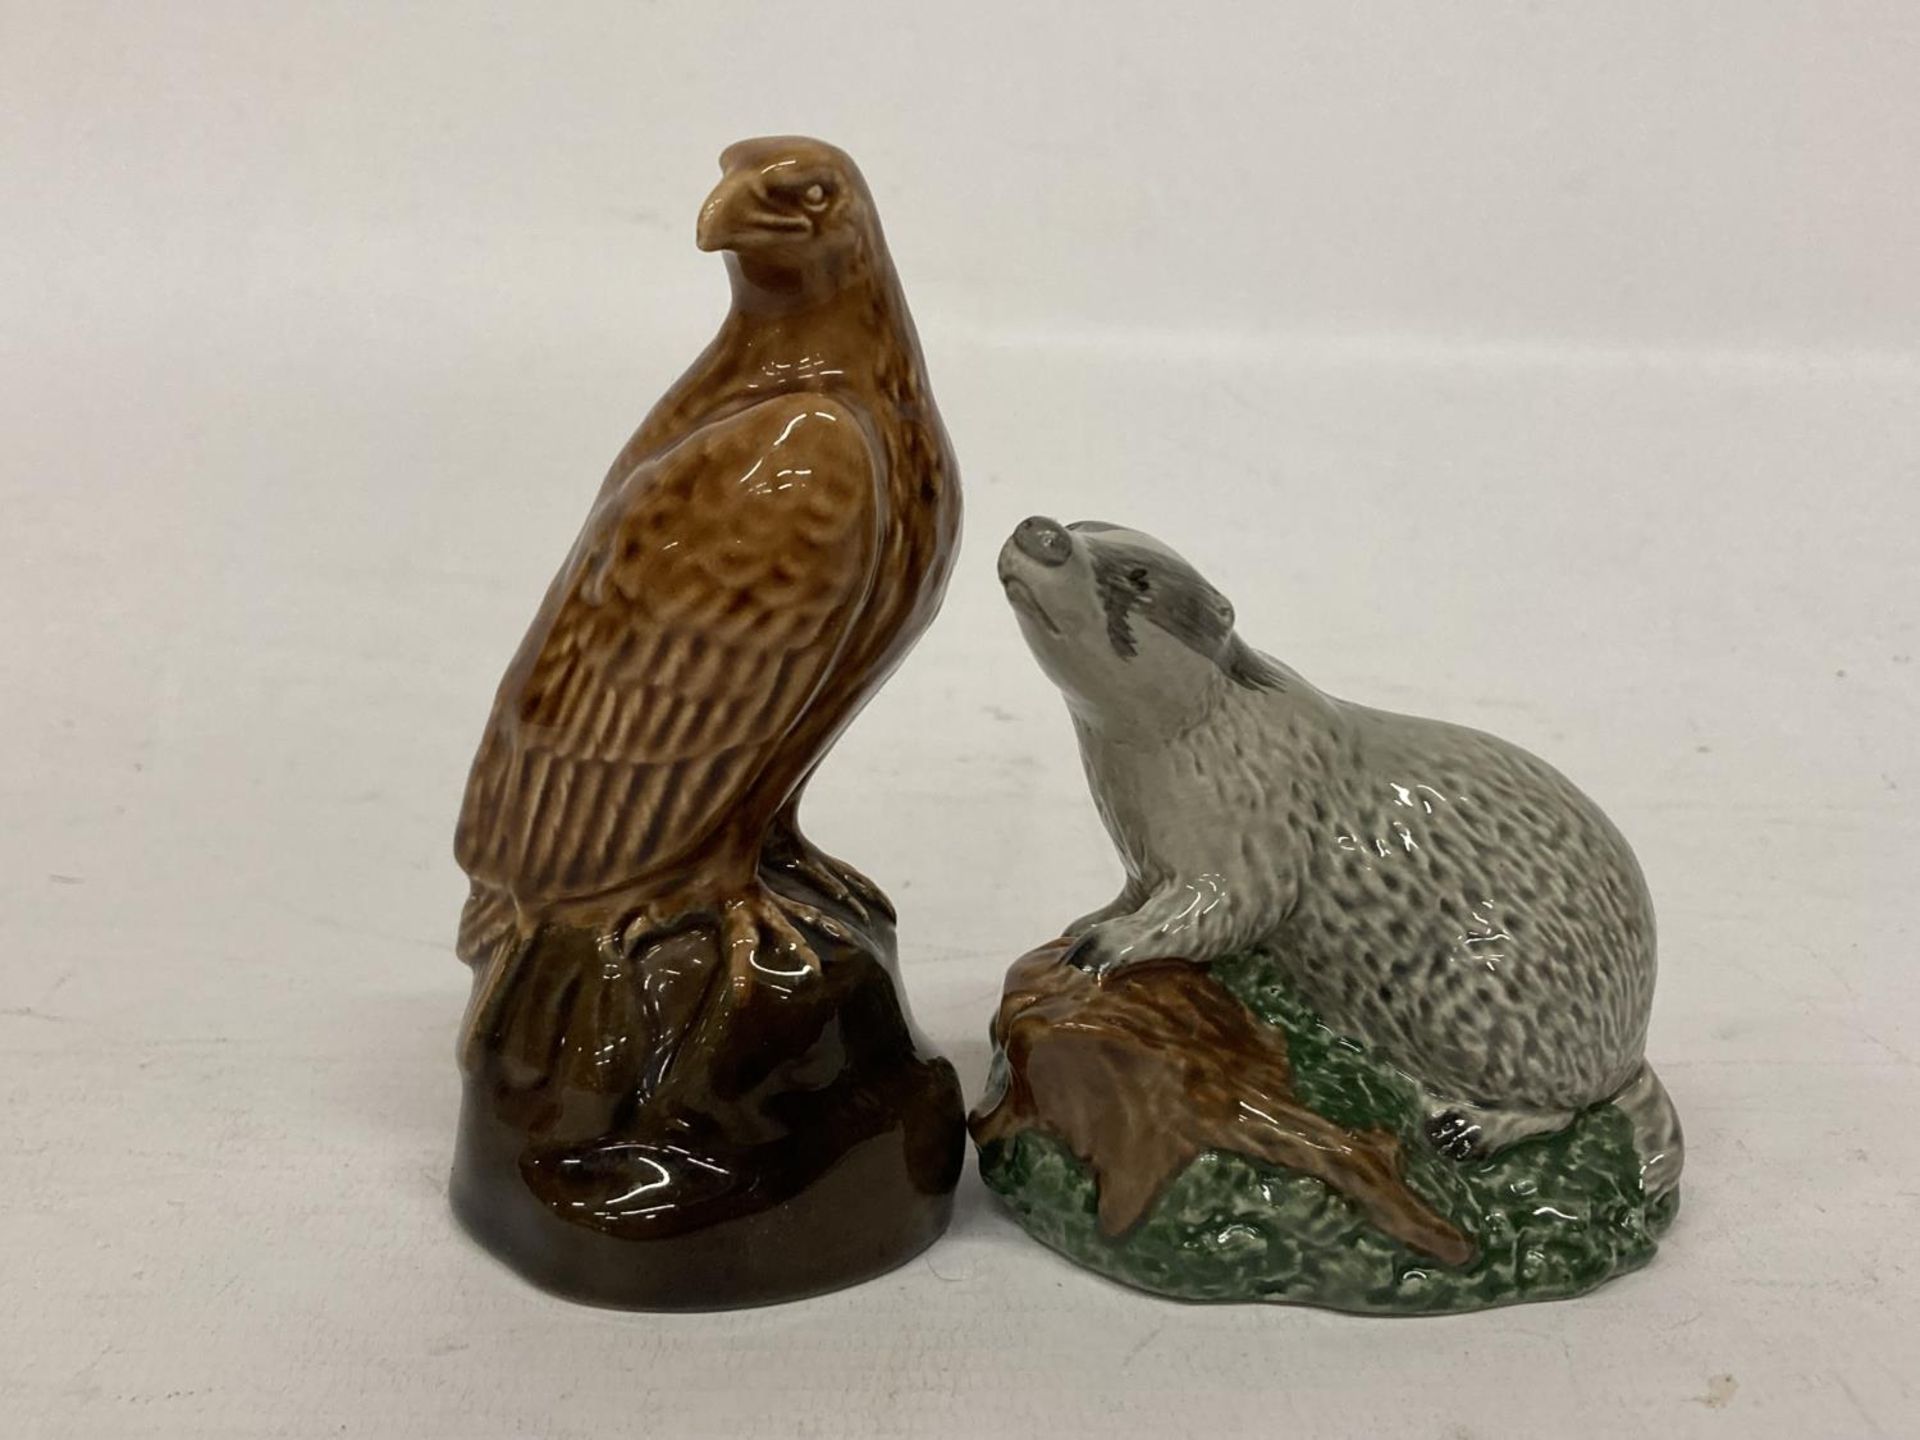 A BESWICK BENEAGLES MINIATURE SCOTCH WHISKEY EAGLE TOGETHER WITH A BADGER